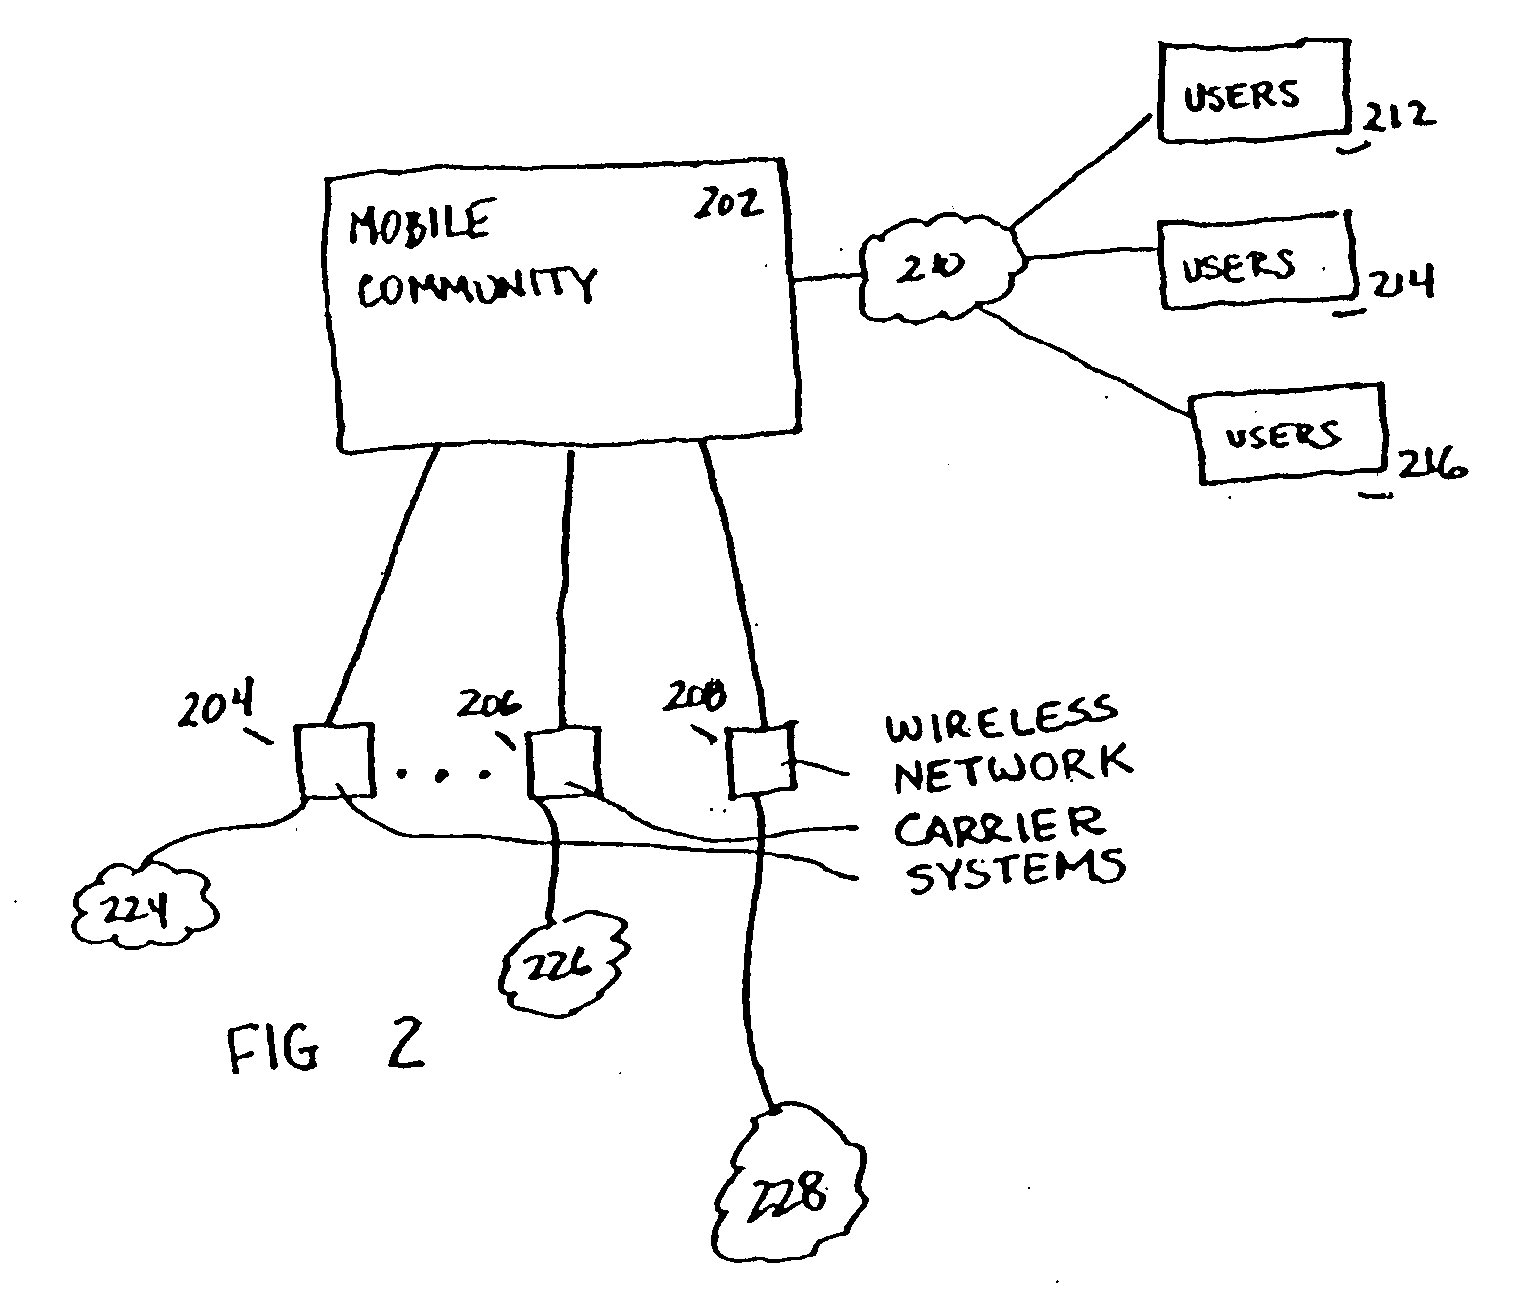 Methods and systems for finding, tagging, rating and suggesting content provided by networked application pods